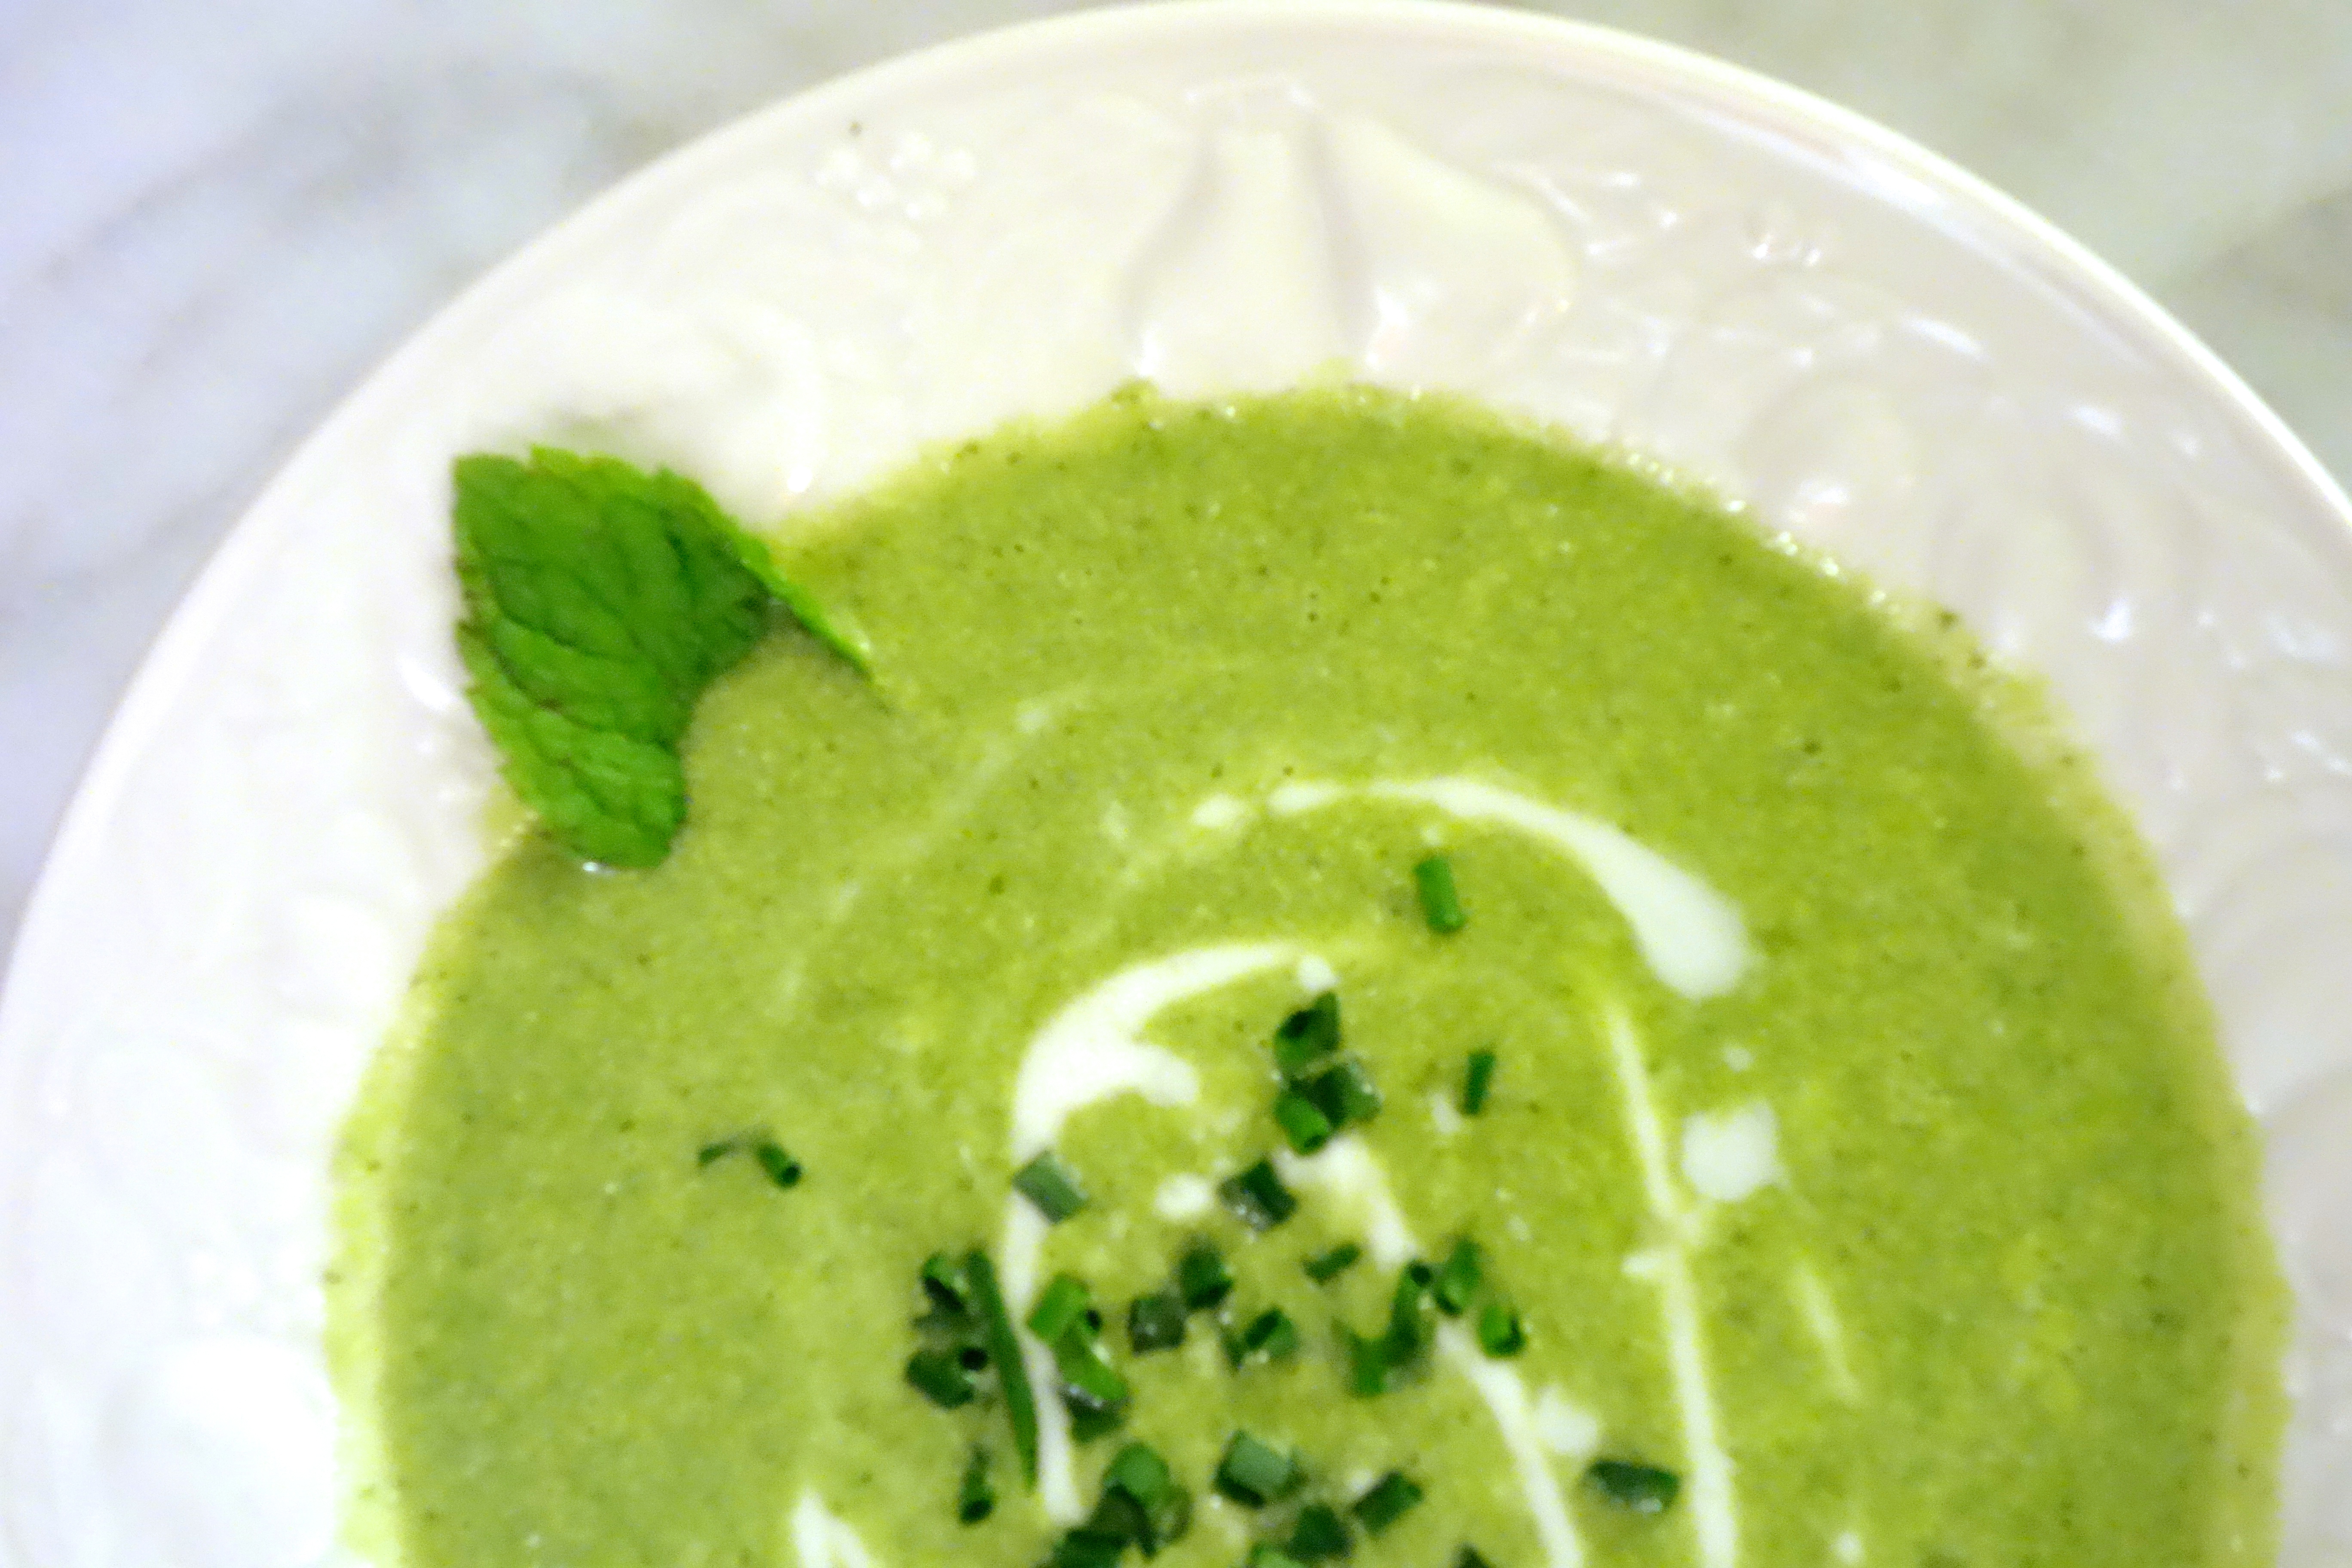 chilled pea soup with mint, tarragon and basil :: by radish*rose